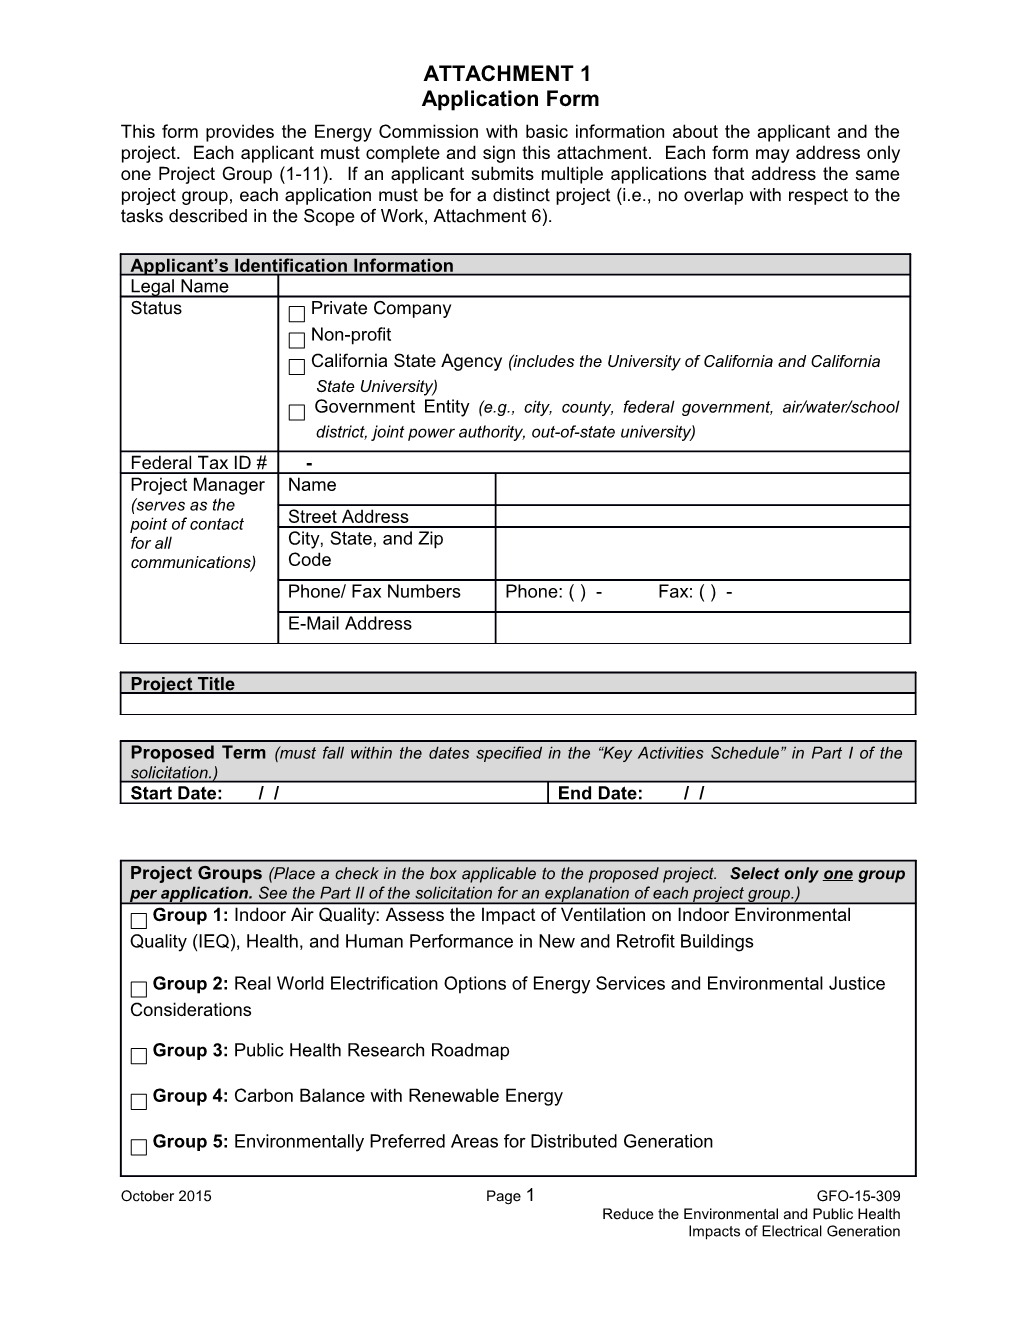 Application Form s75